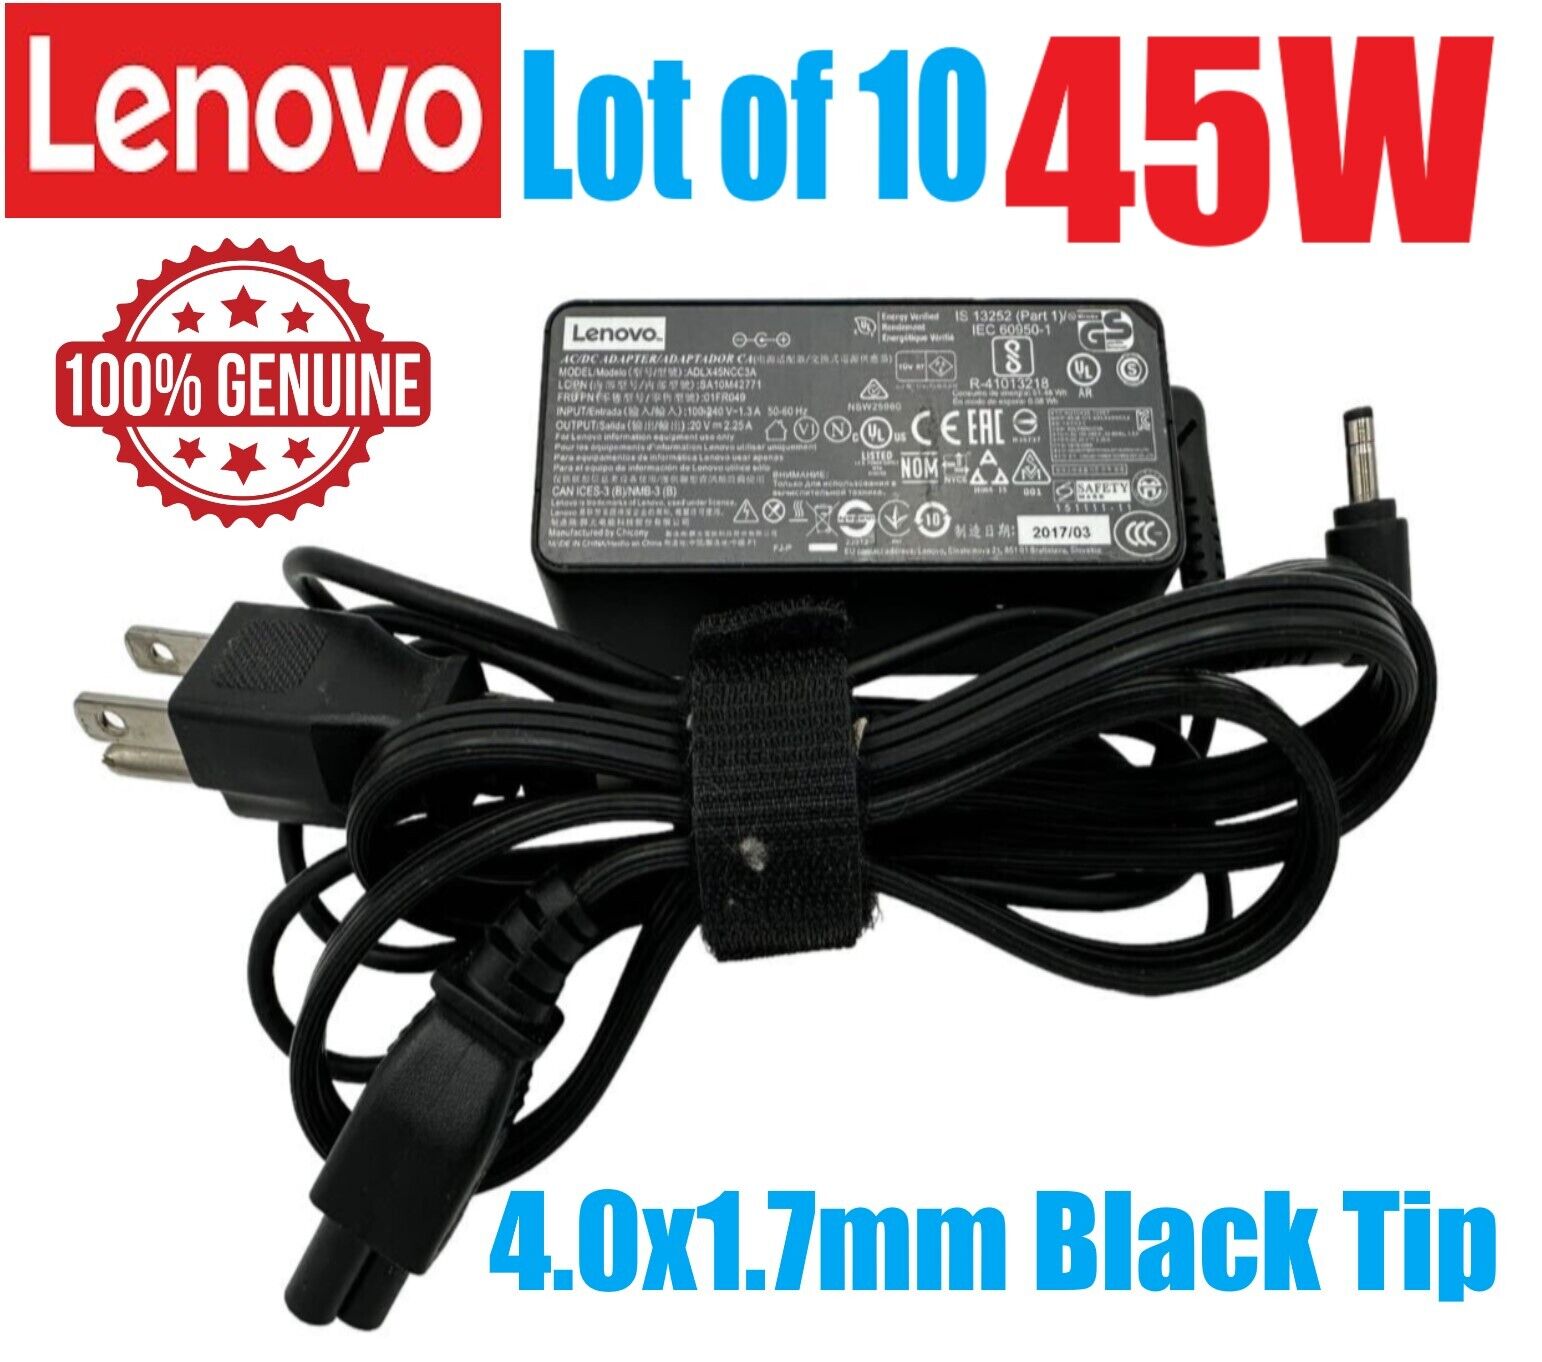 LOT 10 Genuine Lenovo IdeaPad 310 320 330 45W 4x1.7mm AC Adapter Power Charger